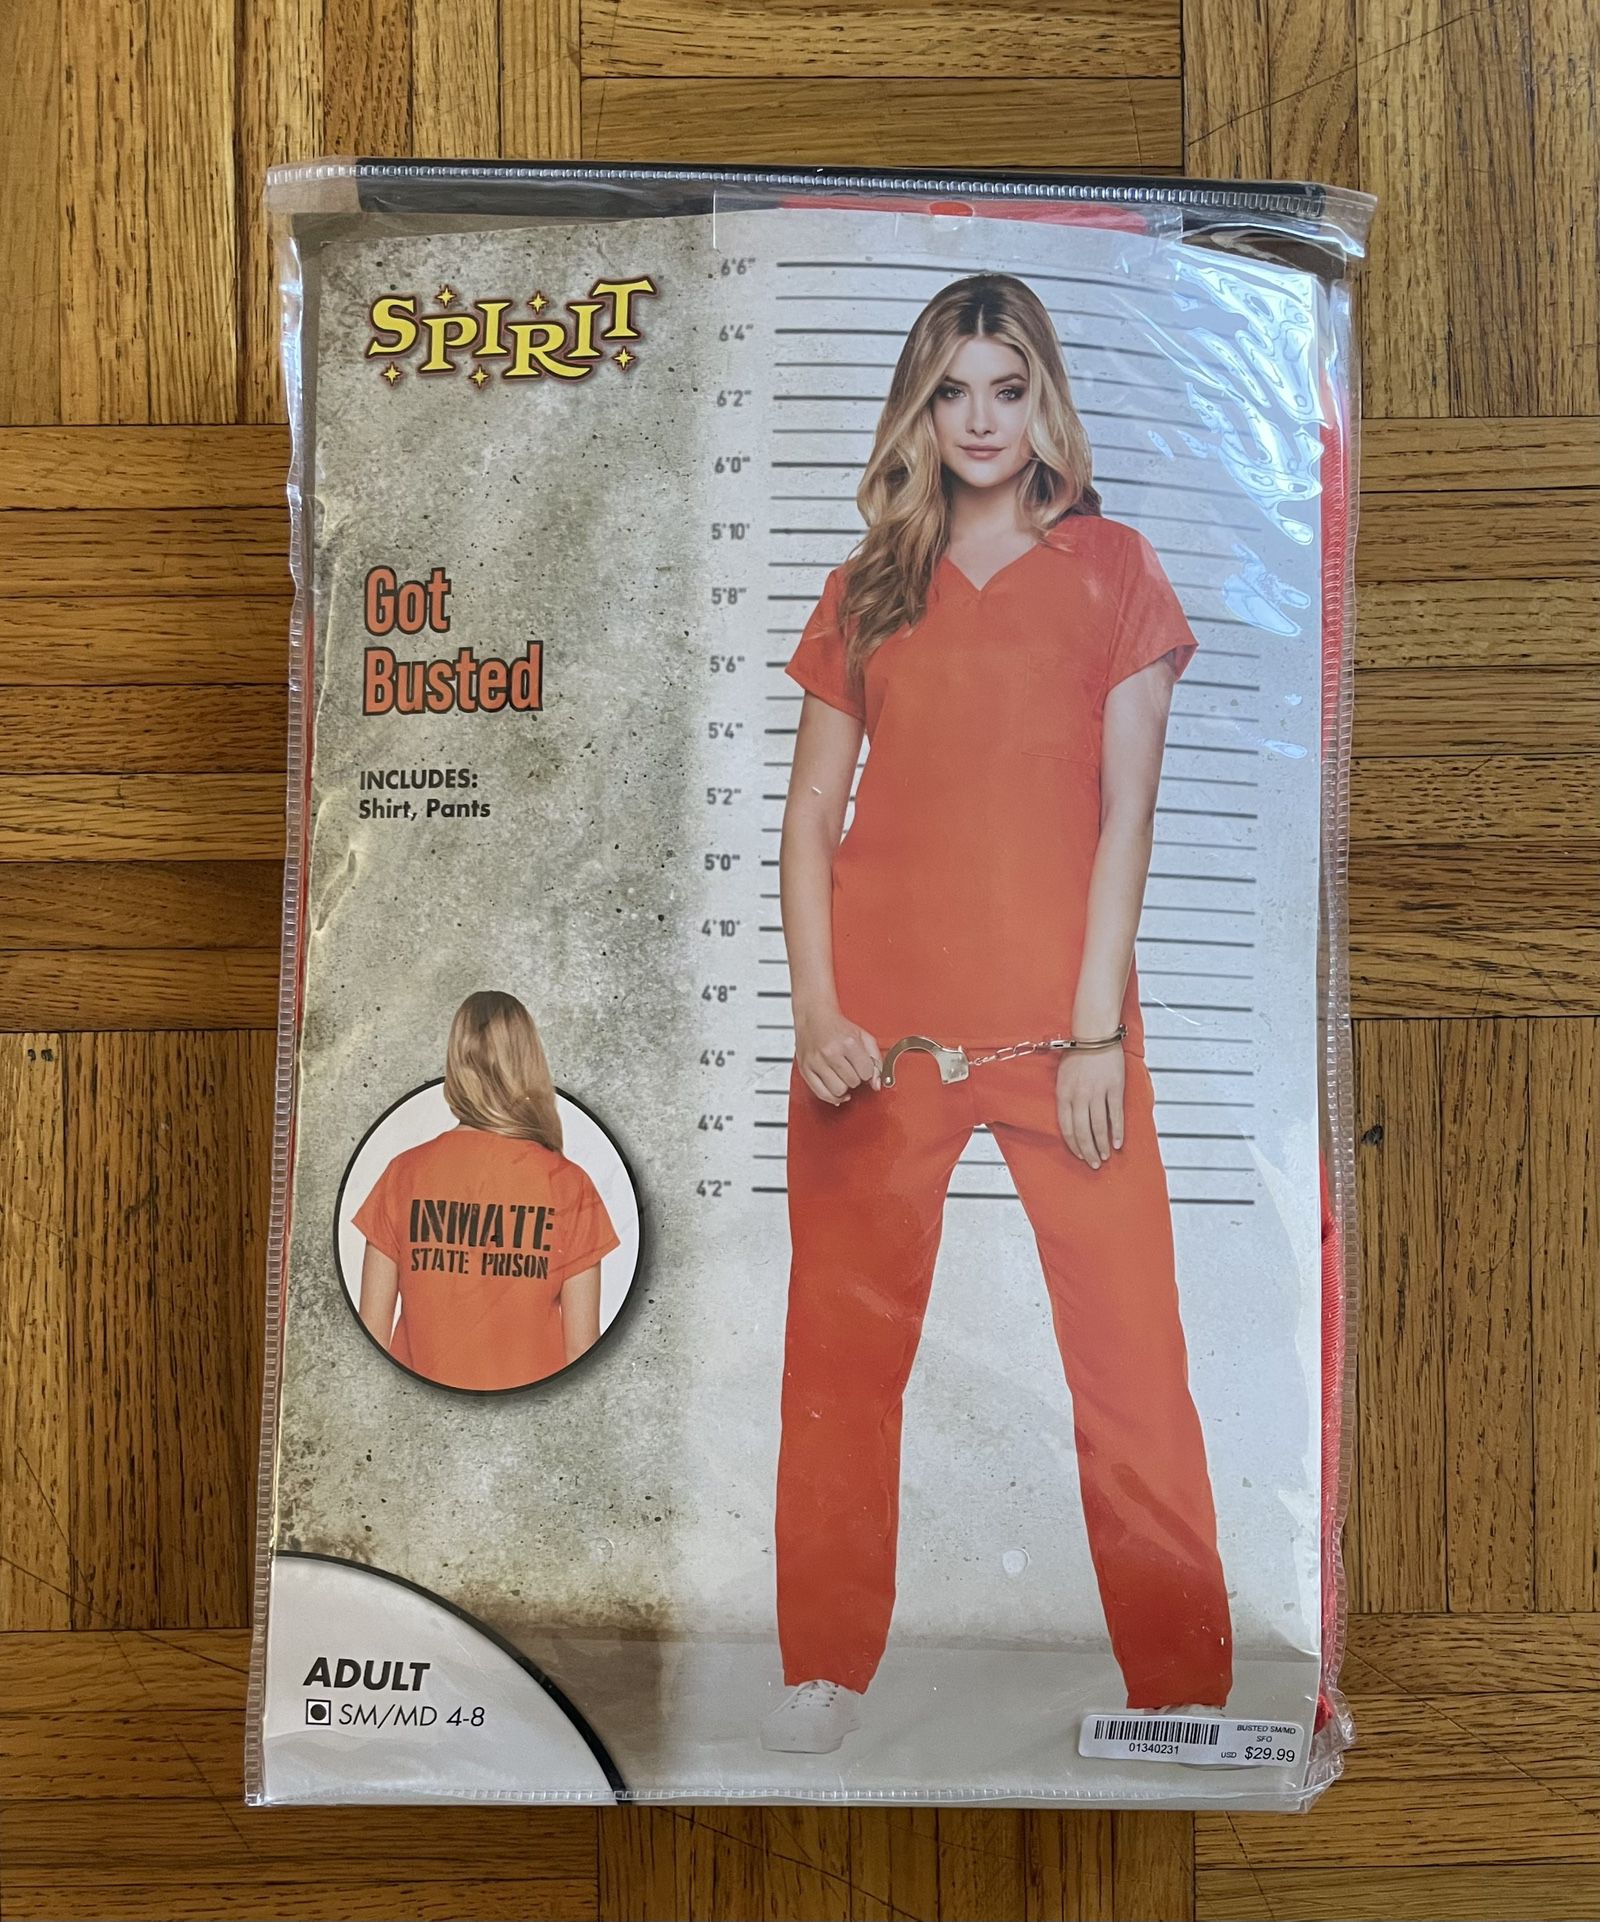 Costume “Got Busted” Jail Inmate Adult SM/MD